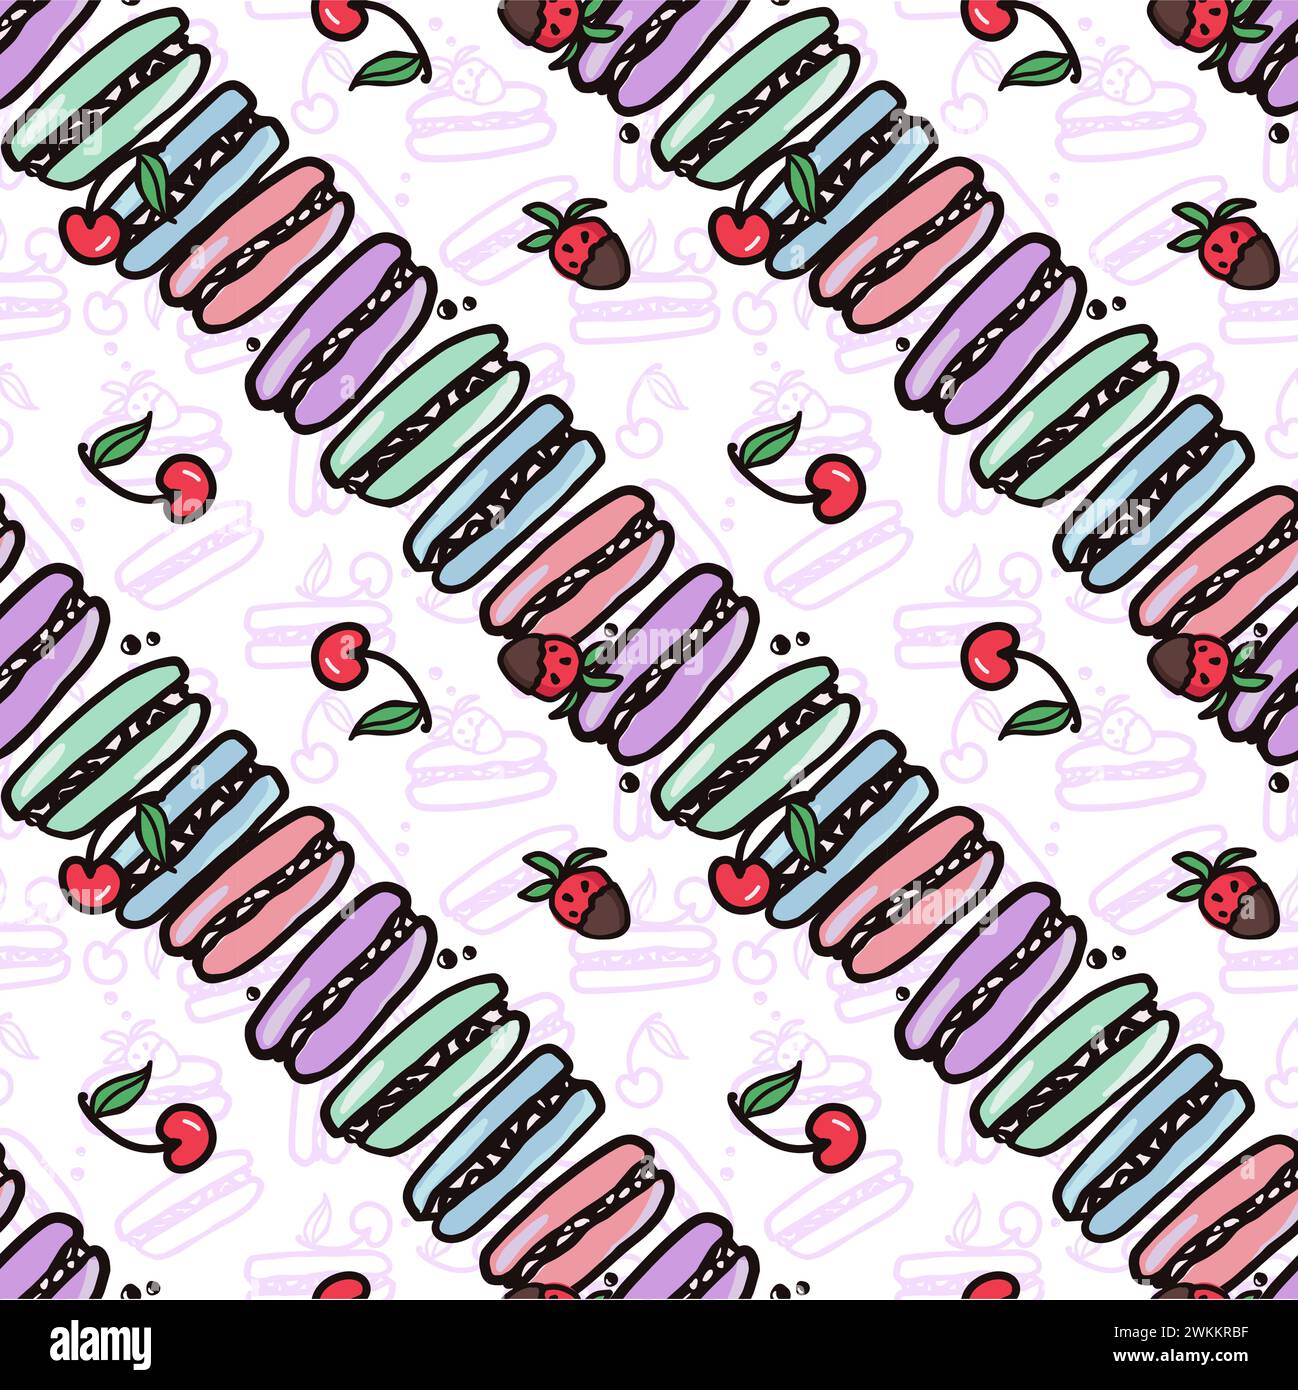 Cherry and strawberry fruit seamless pattern. Summer berries, fruits with leaves, vector background. Hand drawn doodle illustration for cover, fabric, Stock Vector